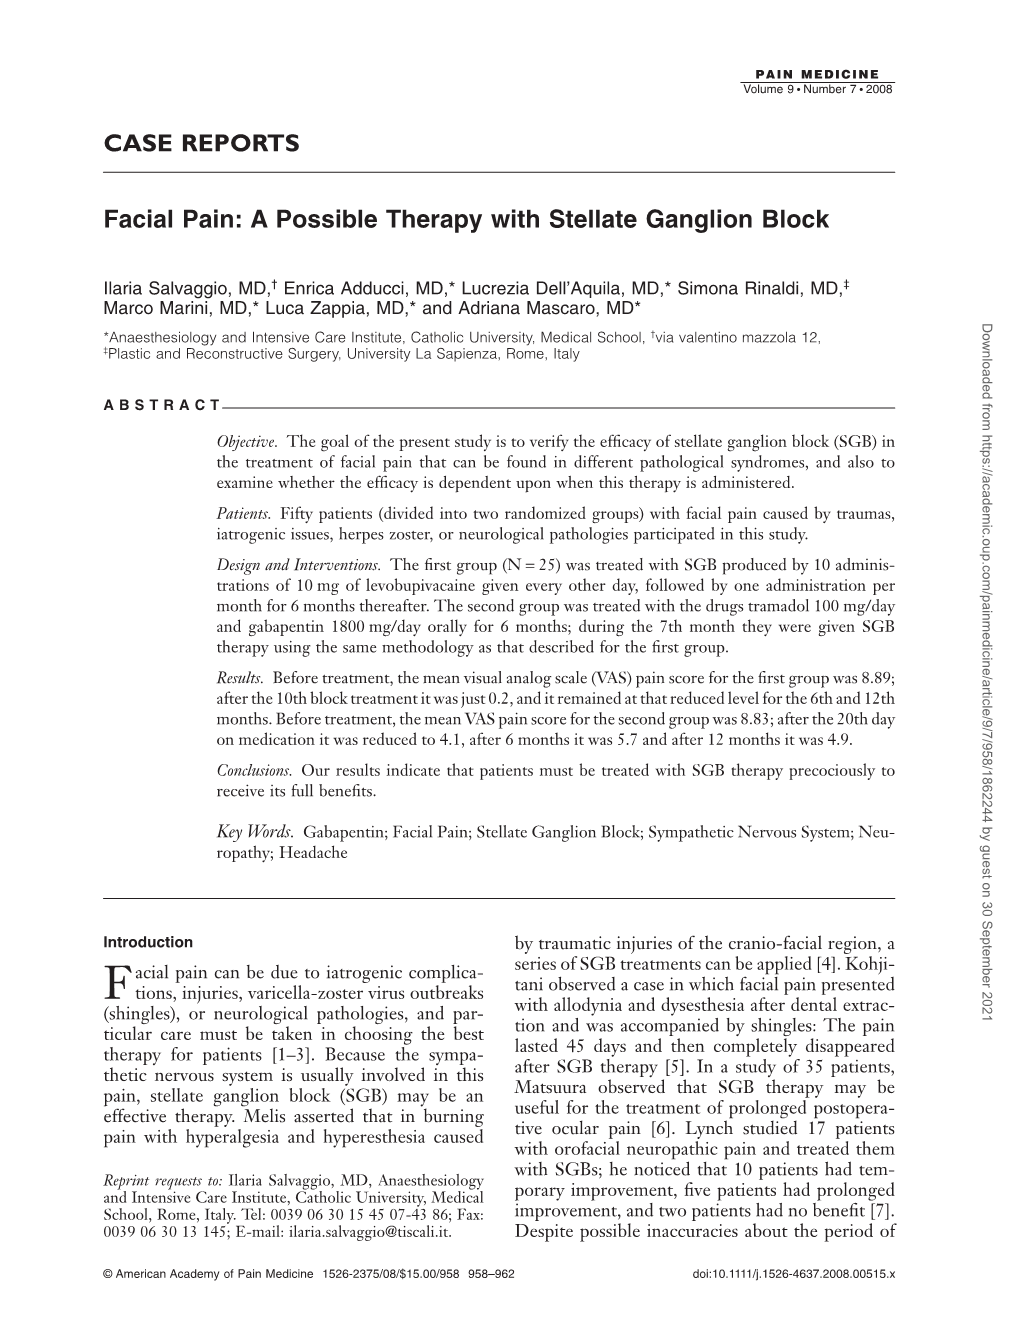 Facial Pain: a Possible Therapy with Stellate Ganglion Block